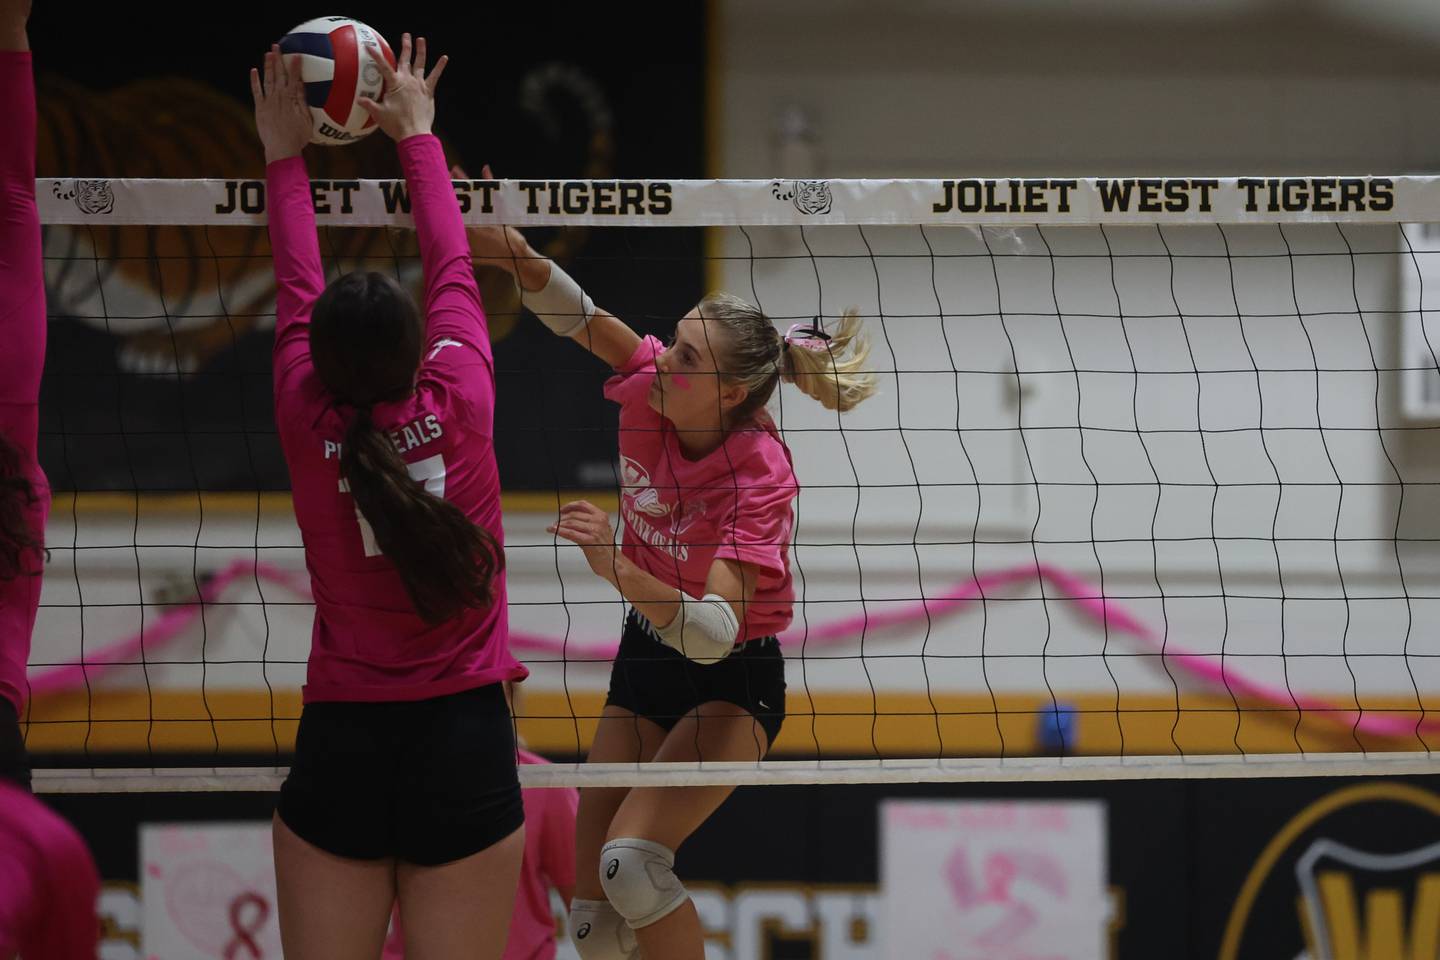 Joliet West’s Ava Grevengoed powers a shot against Joliet Central in the JTHS Pink Heals match. Tuesday, Oct. 4, 2022, in Joliet.